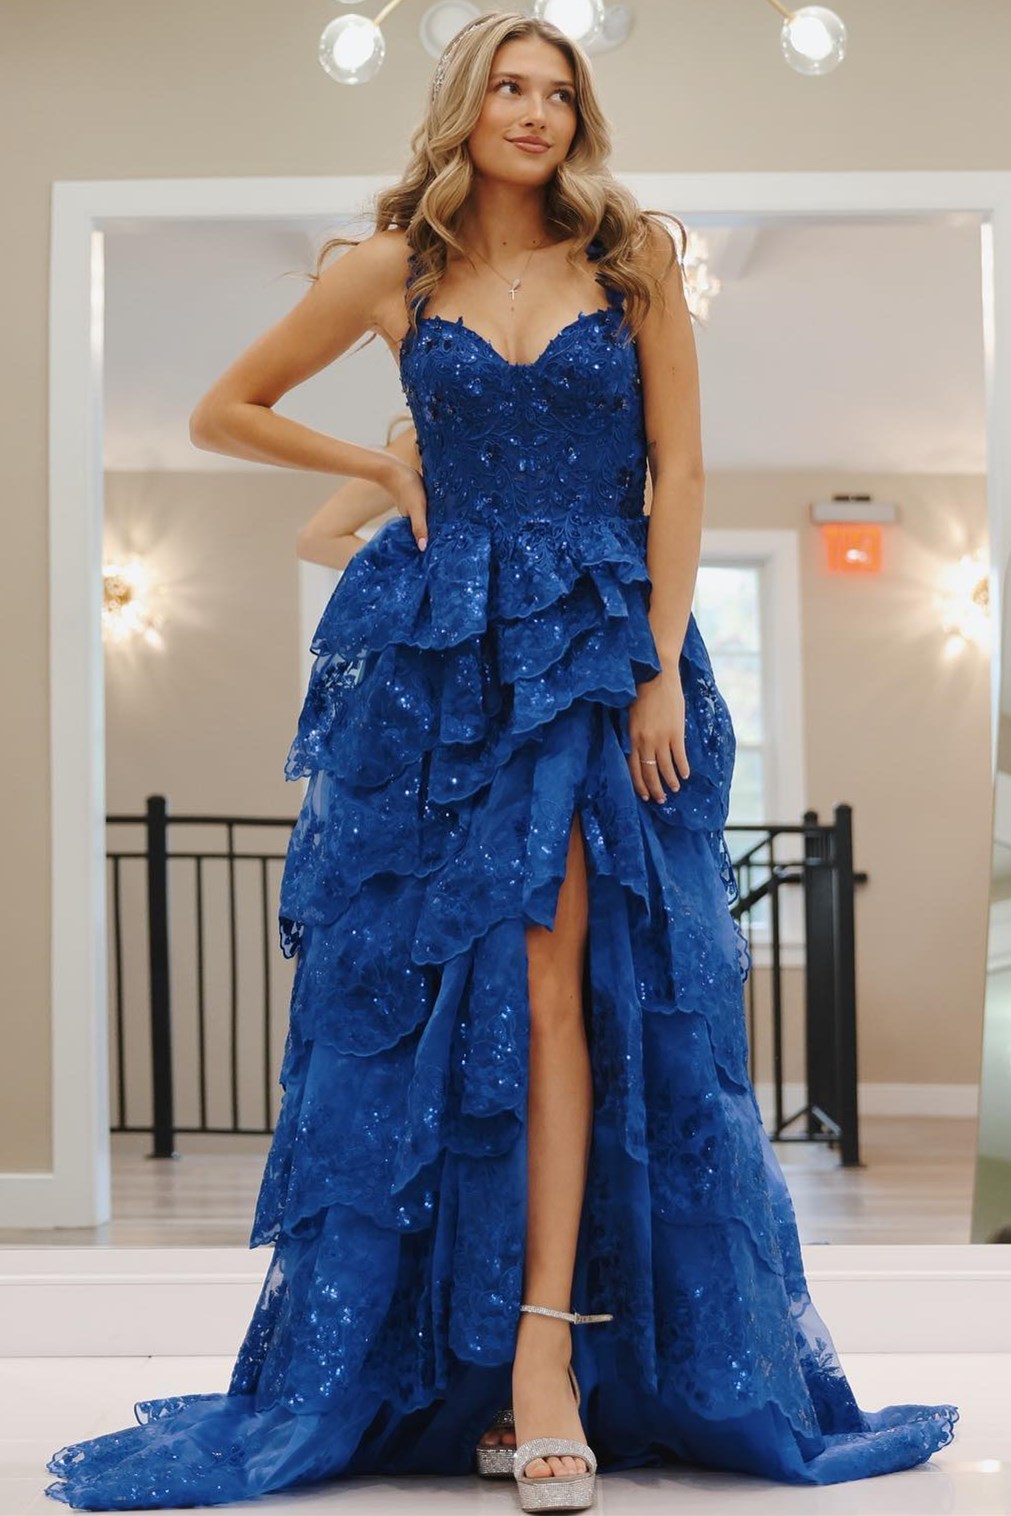 Plunge Neckline Dress with Tulle Bottom - Royal Blue - Be Fabulous